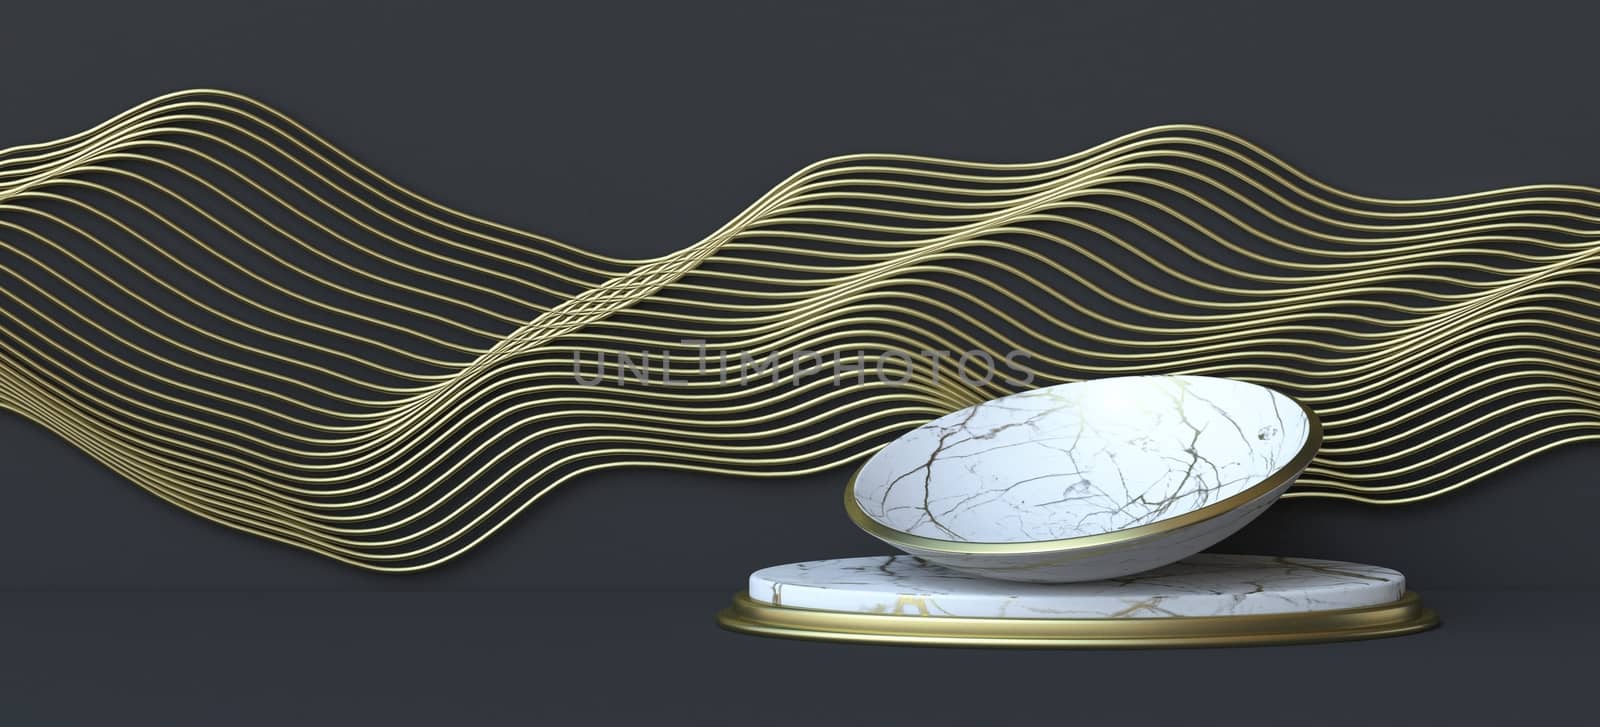 Abstract background with golden lines wave and marble dish 3D render illustration on black background